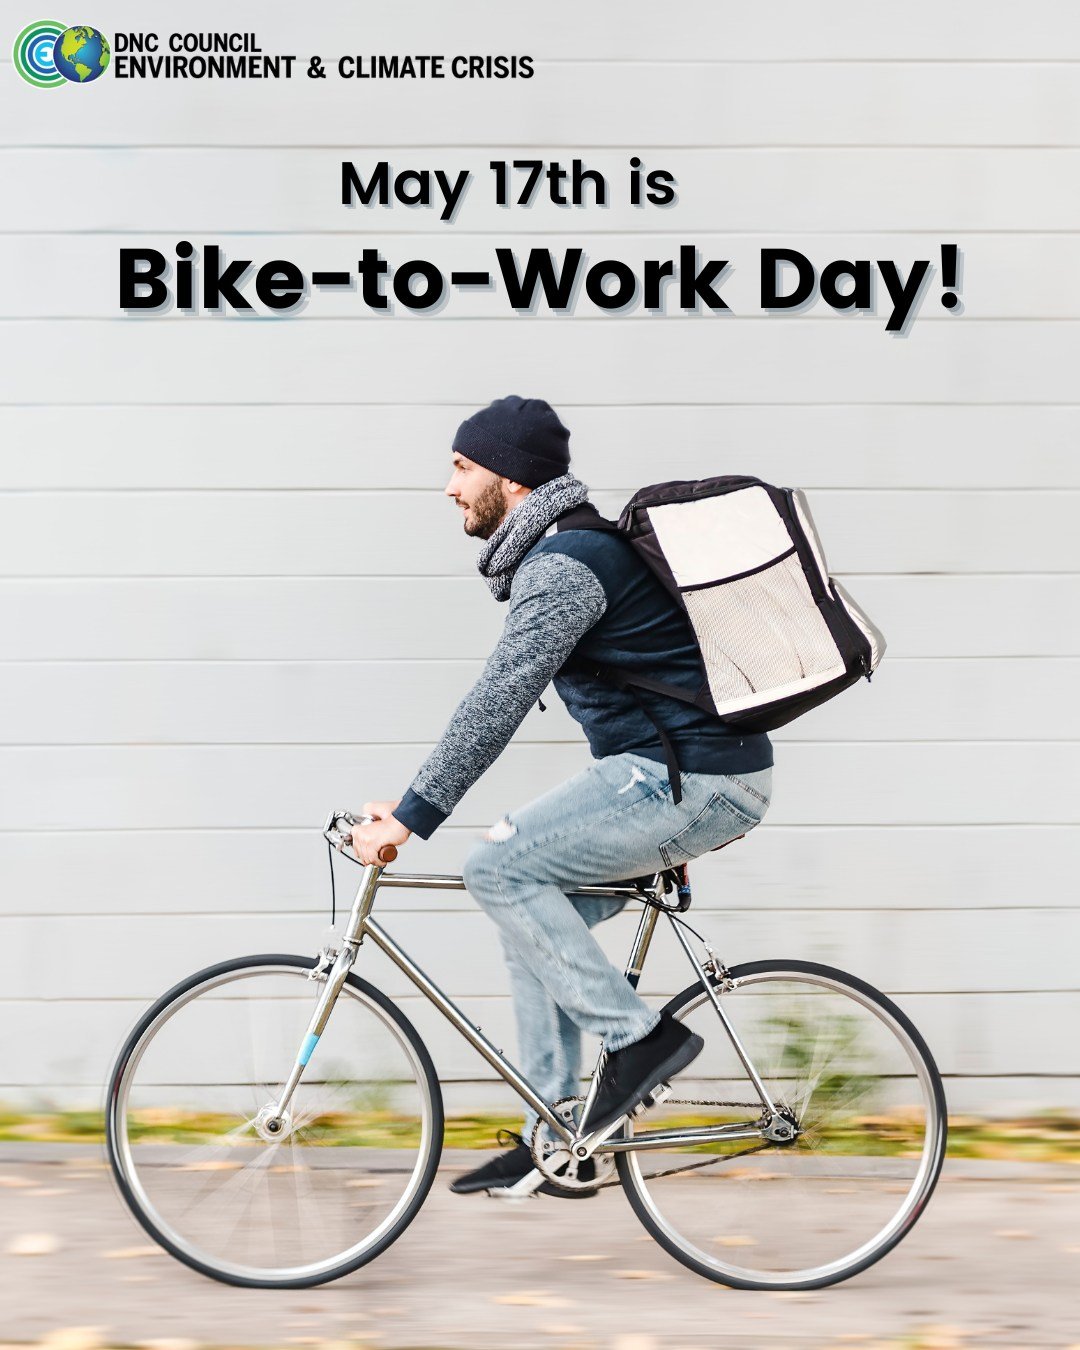 🚲 Celebrate Bike-to-work day with us!

40% of trips in the U.S. are less than two miles. Biking is a feasible and fun way to get around for those who are able. More from the American @bikeleague: https://bikeleague.org/ridesmart/commuting/
.
.
.
#Bi